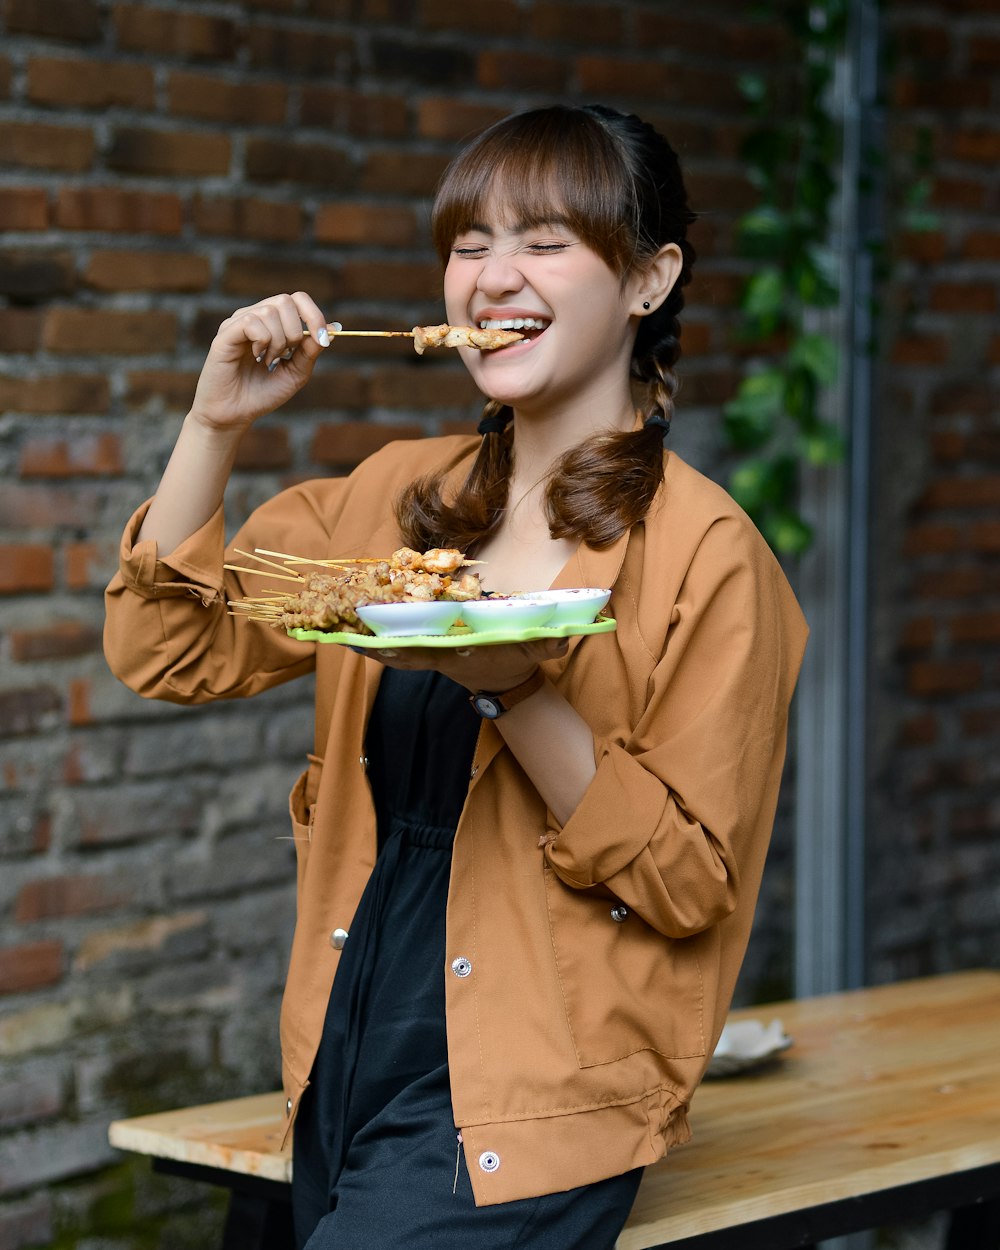 a woman eating food from a plate on a table